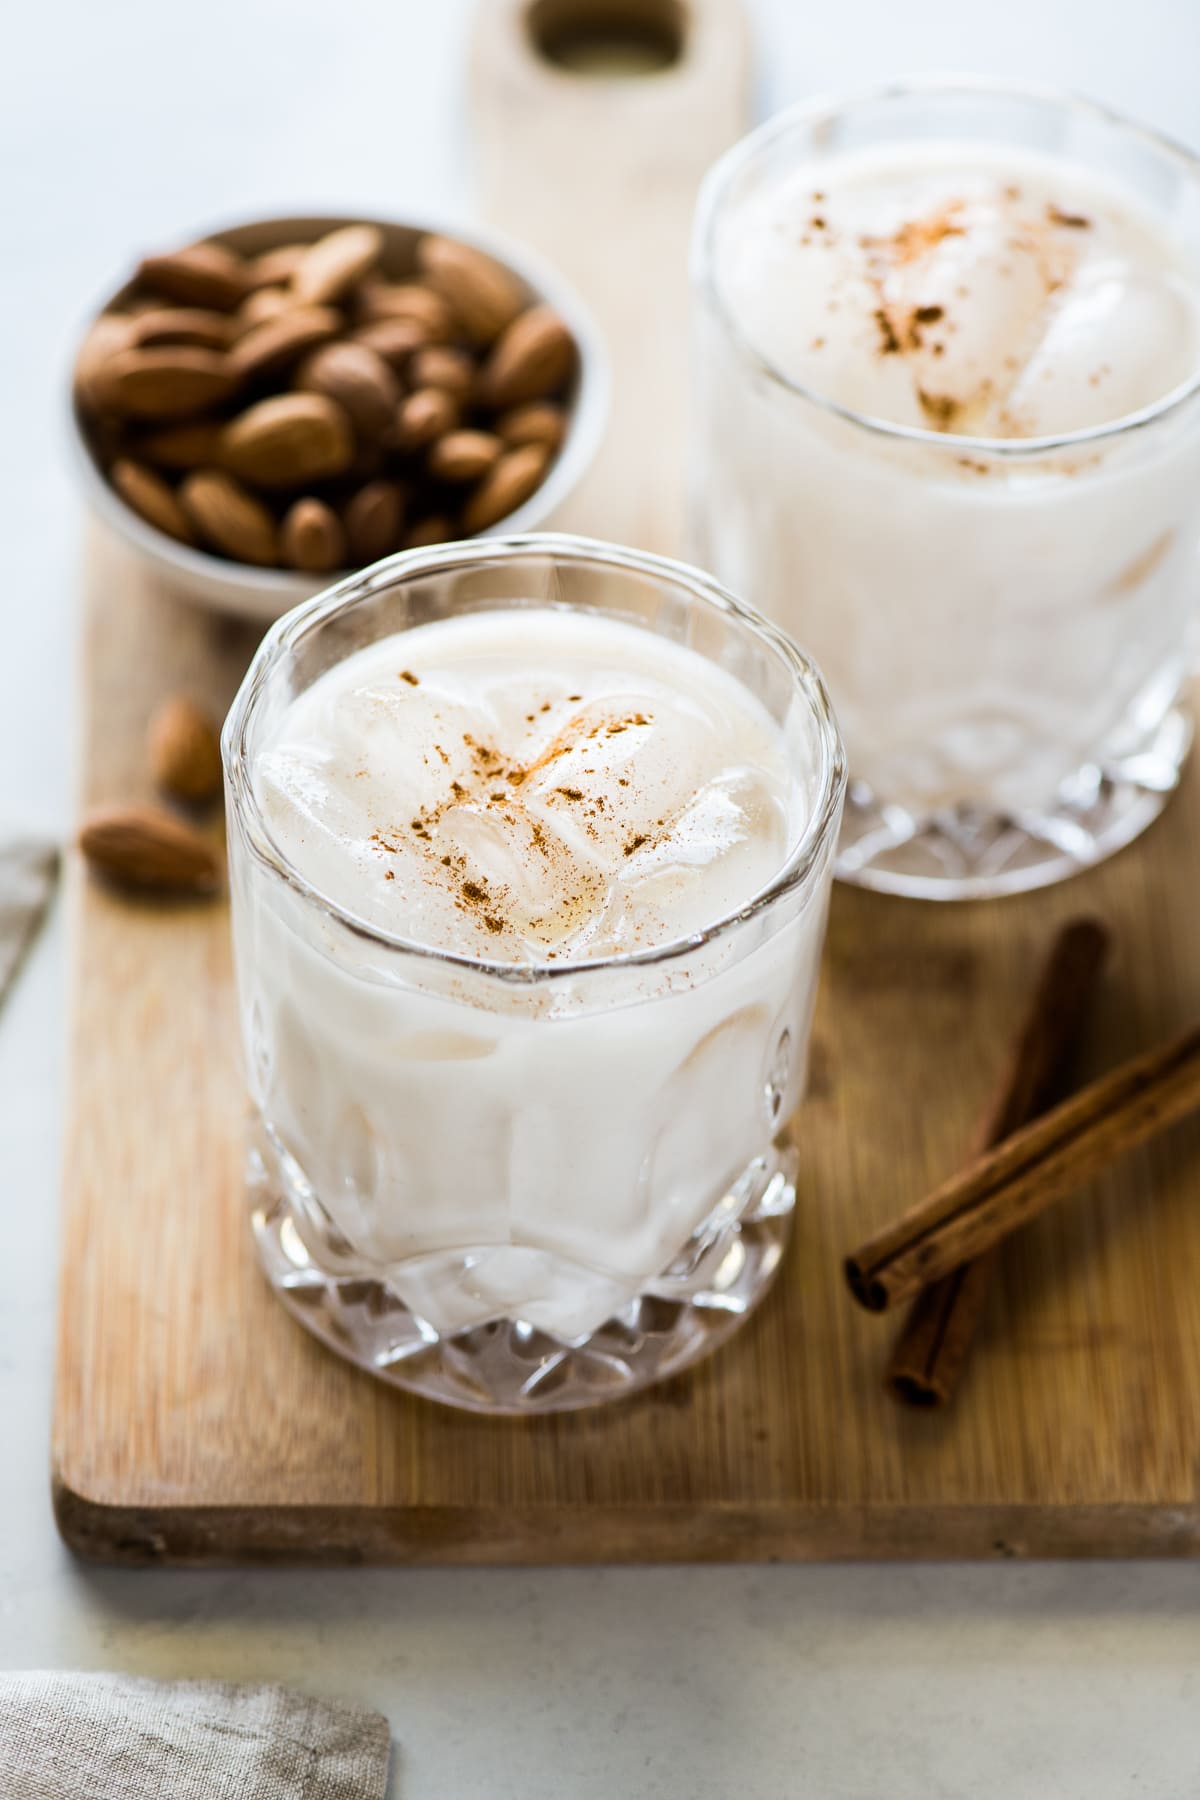 A glass of horchata filled with ice and garnished with a touch of ground cinnamon.